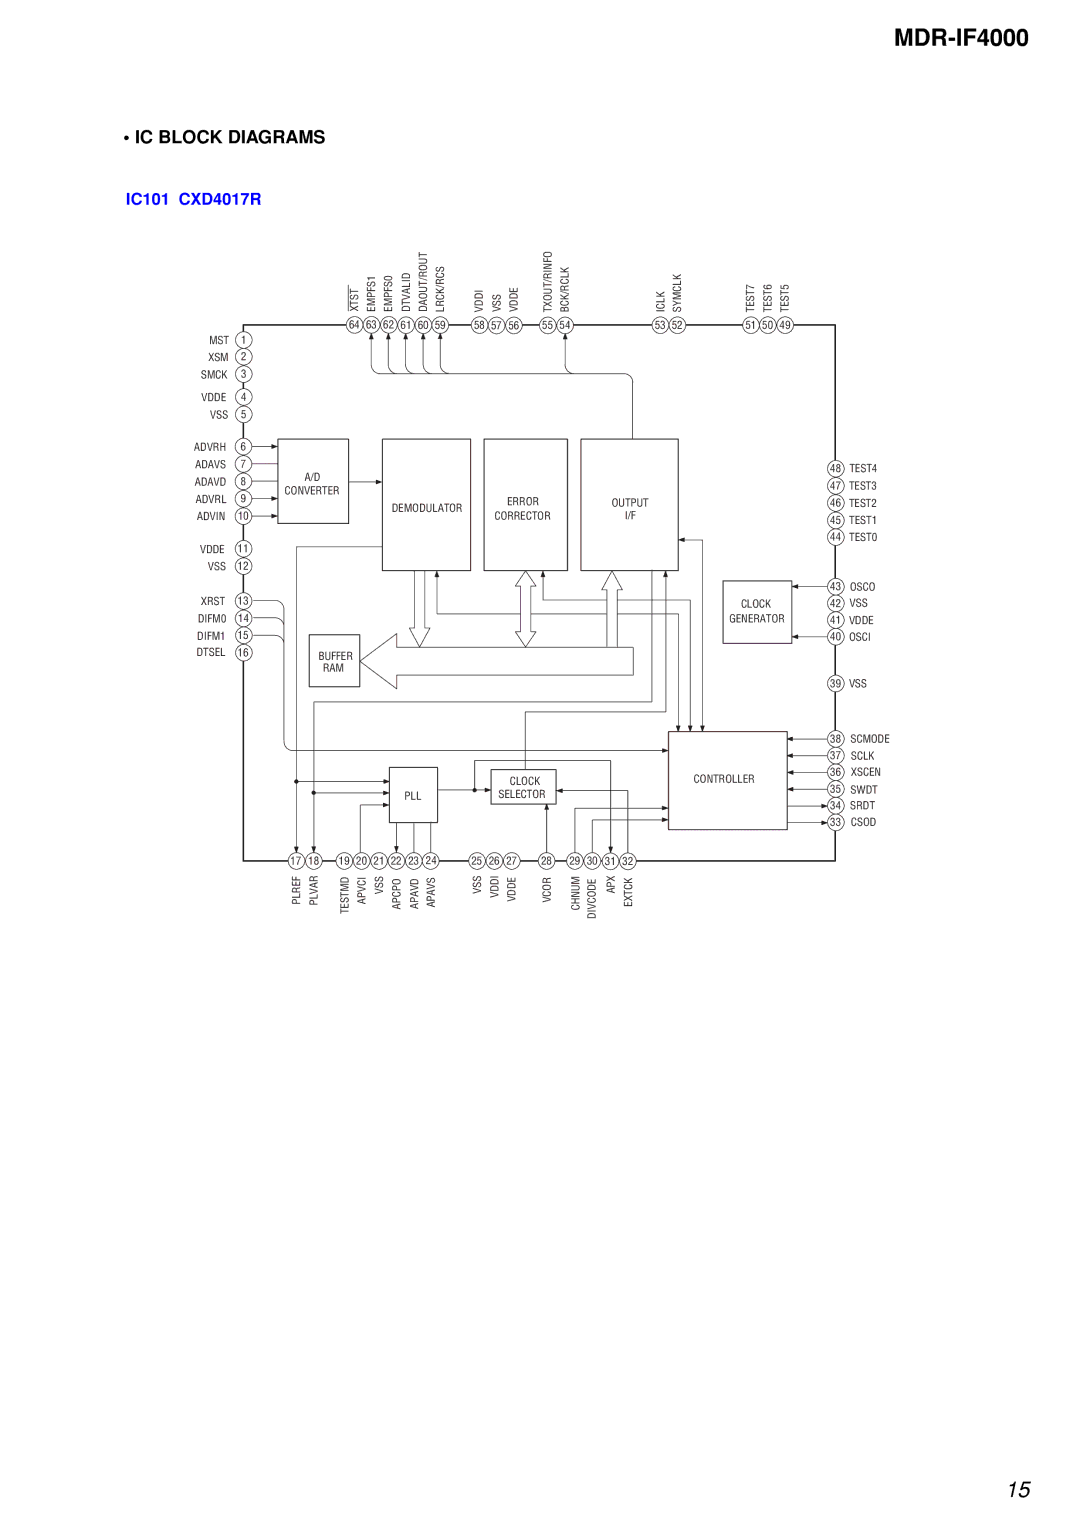 Sony MDR-IF4000 service manual IC Block Diagrams, IC101 CXD4017R 